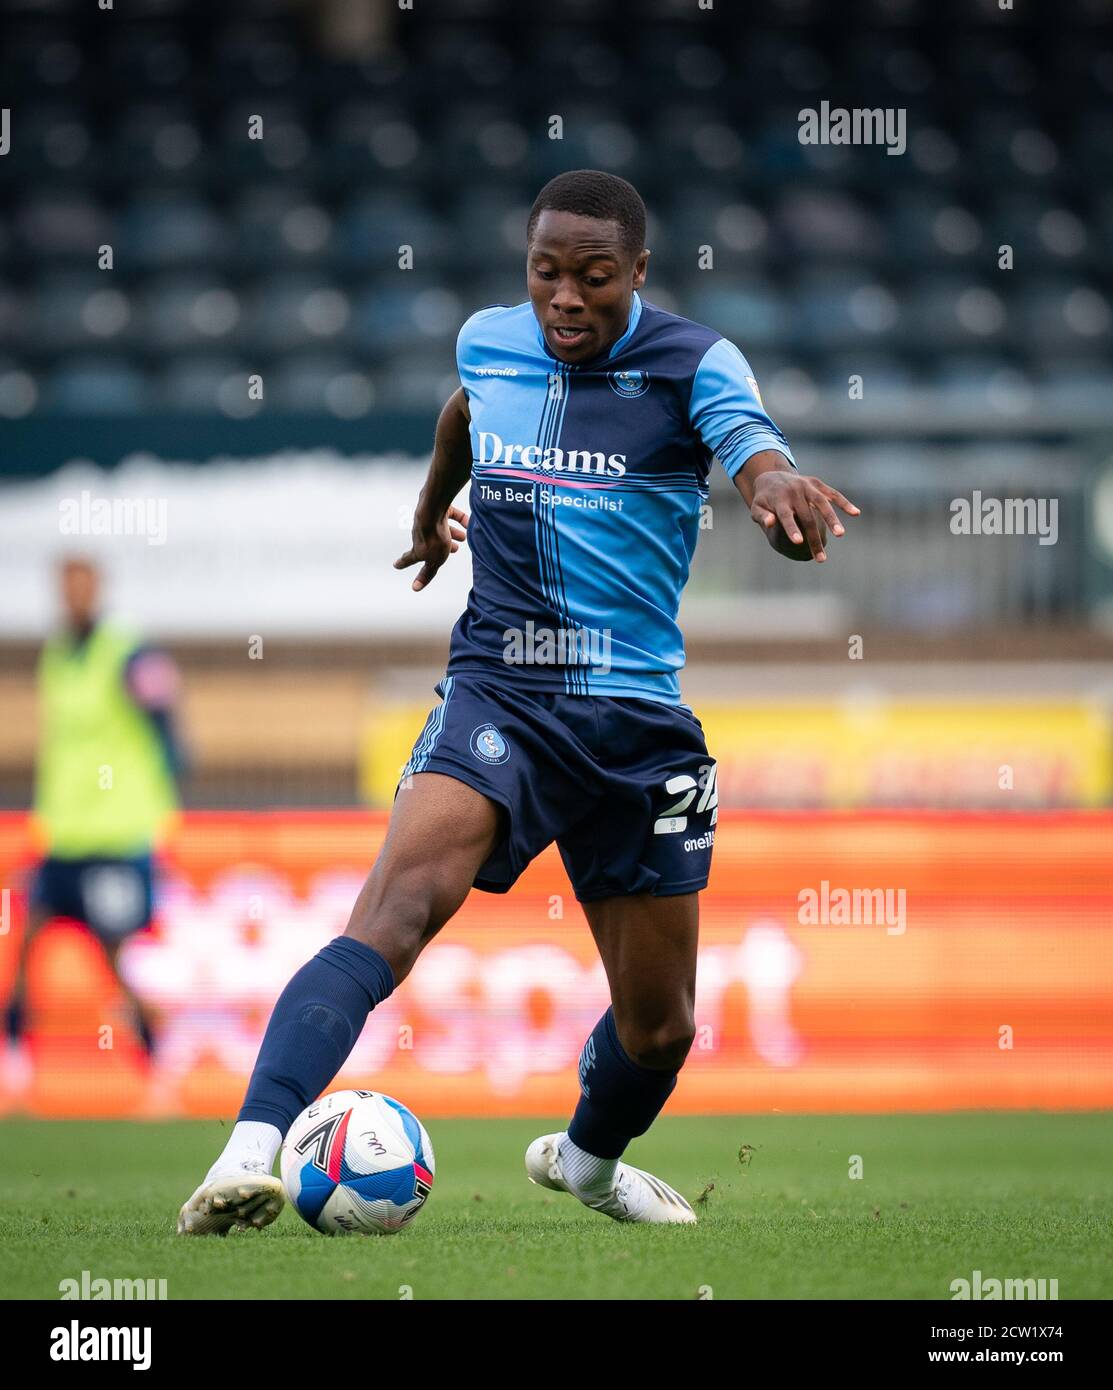 High Wycombe, UK. 26th Sep, 2020. Dennis Adeniran (on loan from Everton) of Wycombe Wanderers during the Sky Bet Championship match between Wycombe Wanderers and Swansea City played behind closed doors due to the ongoing COVID-19 pandemic government guidelines where supporters are unable to attend at Adams Park, High Wycombe, England on 26 September 2020. Photo by Andy Rowland. Credit: PRiME Media Images/Alamy Live News Stock Photo